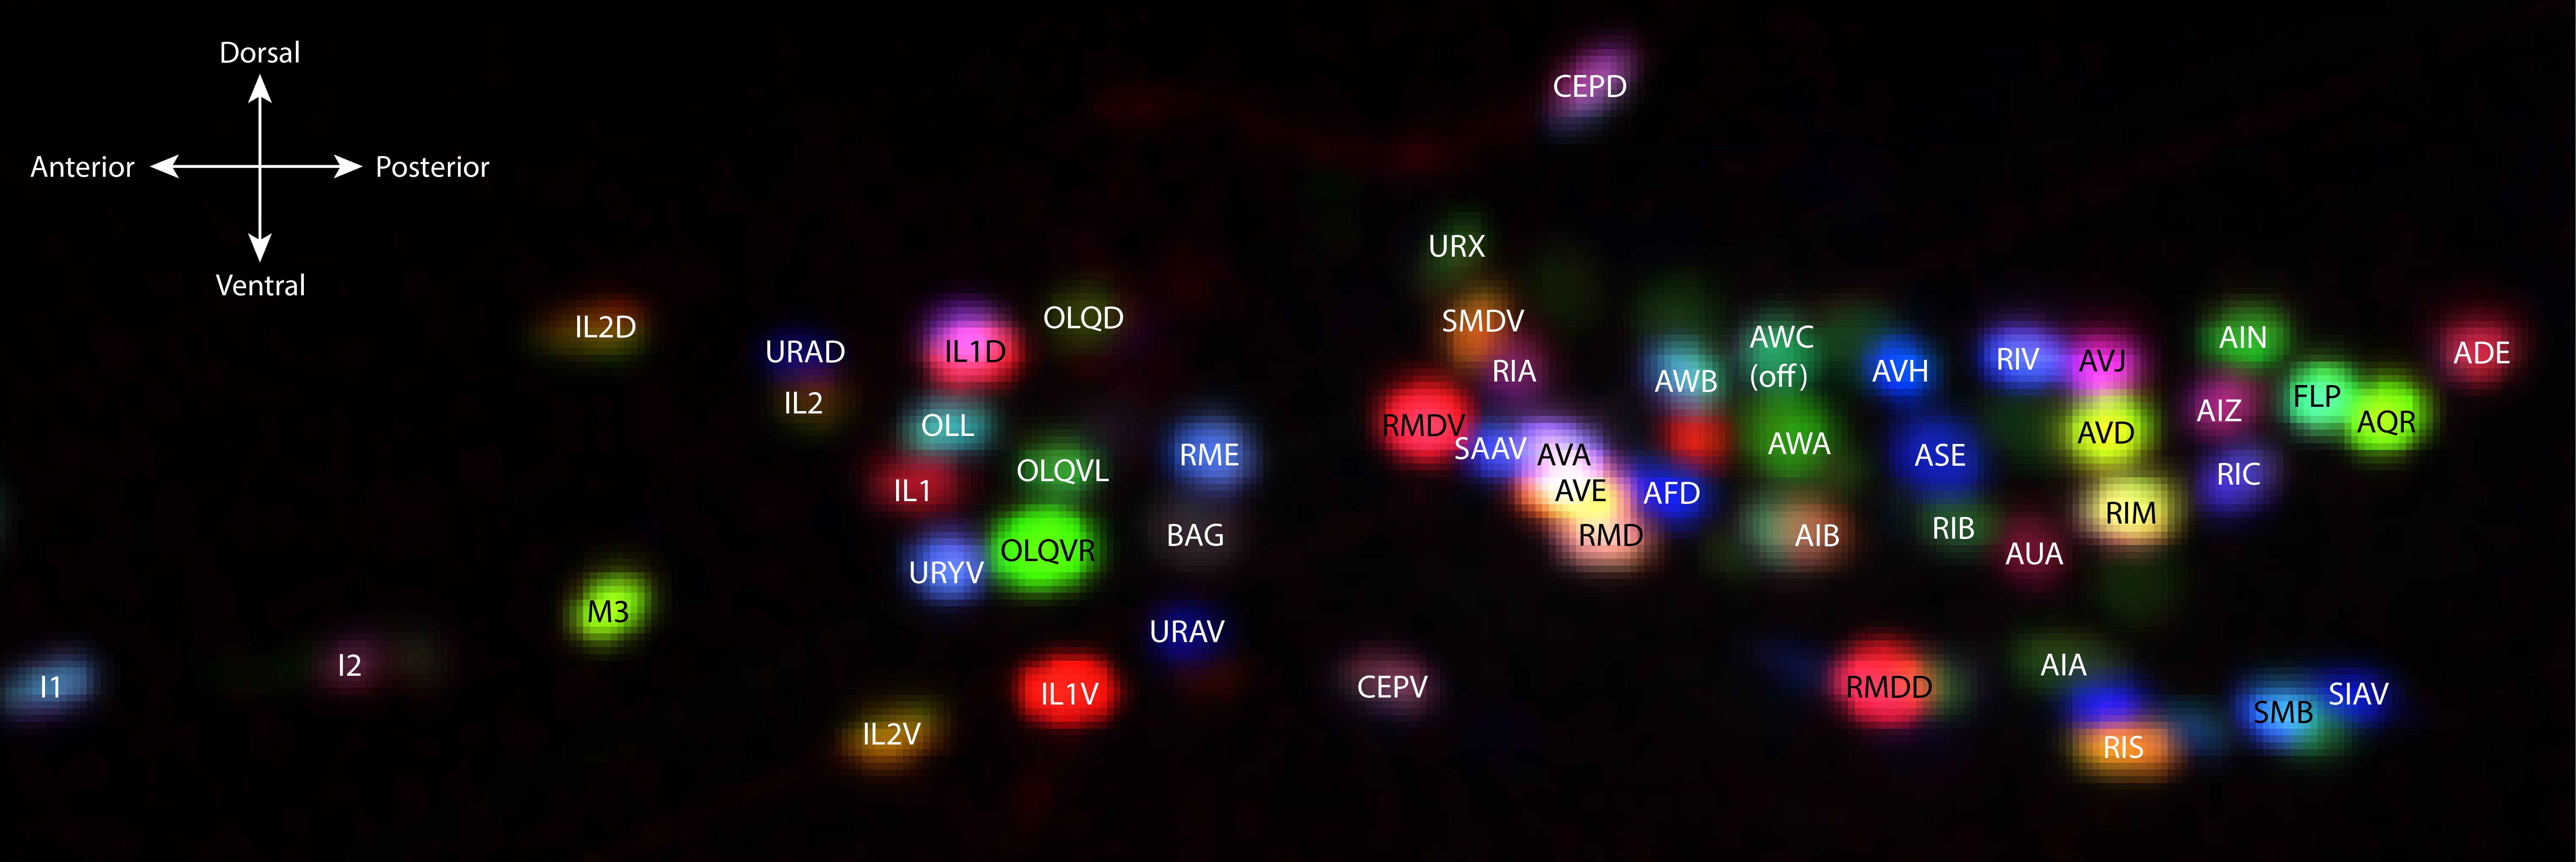 A horizontally oriented image with a black background shows a constellation of colorfully labeled cells with abbreviated names on each. 